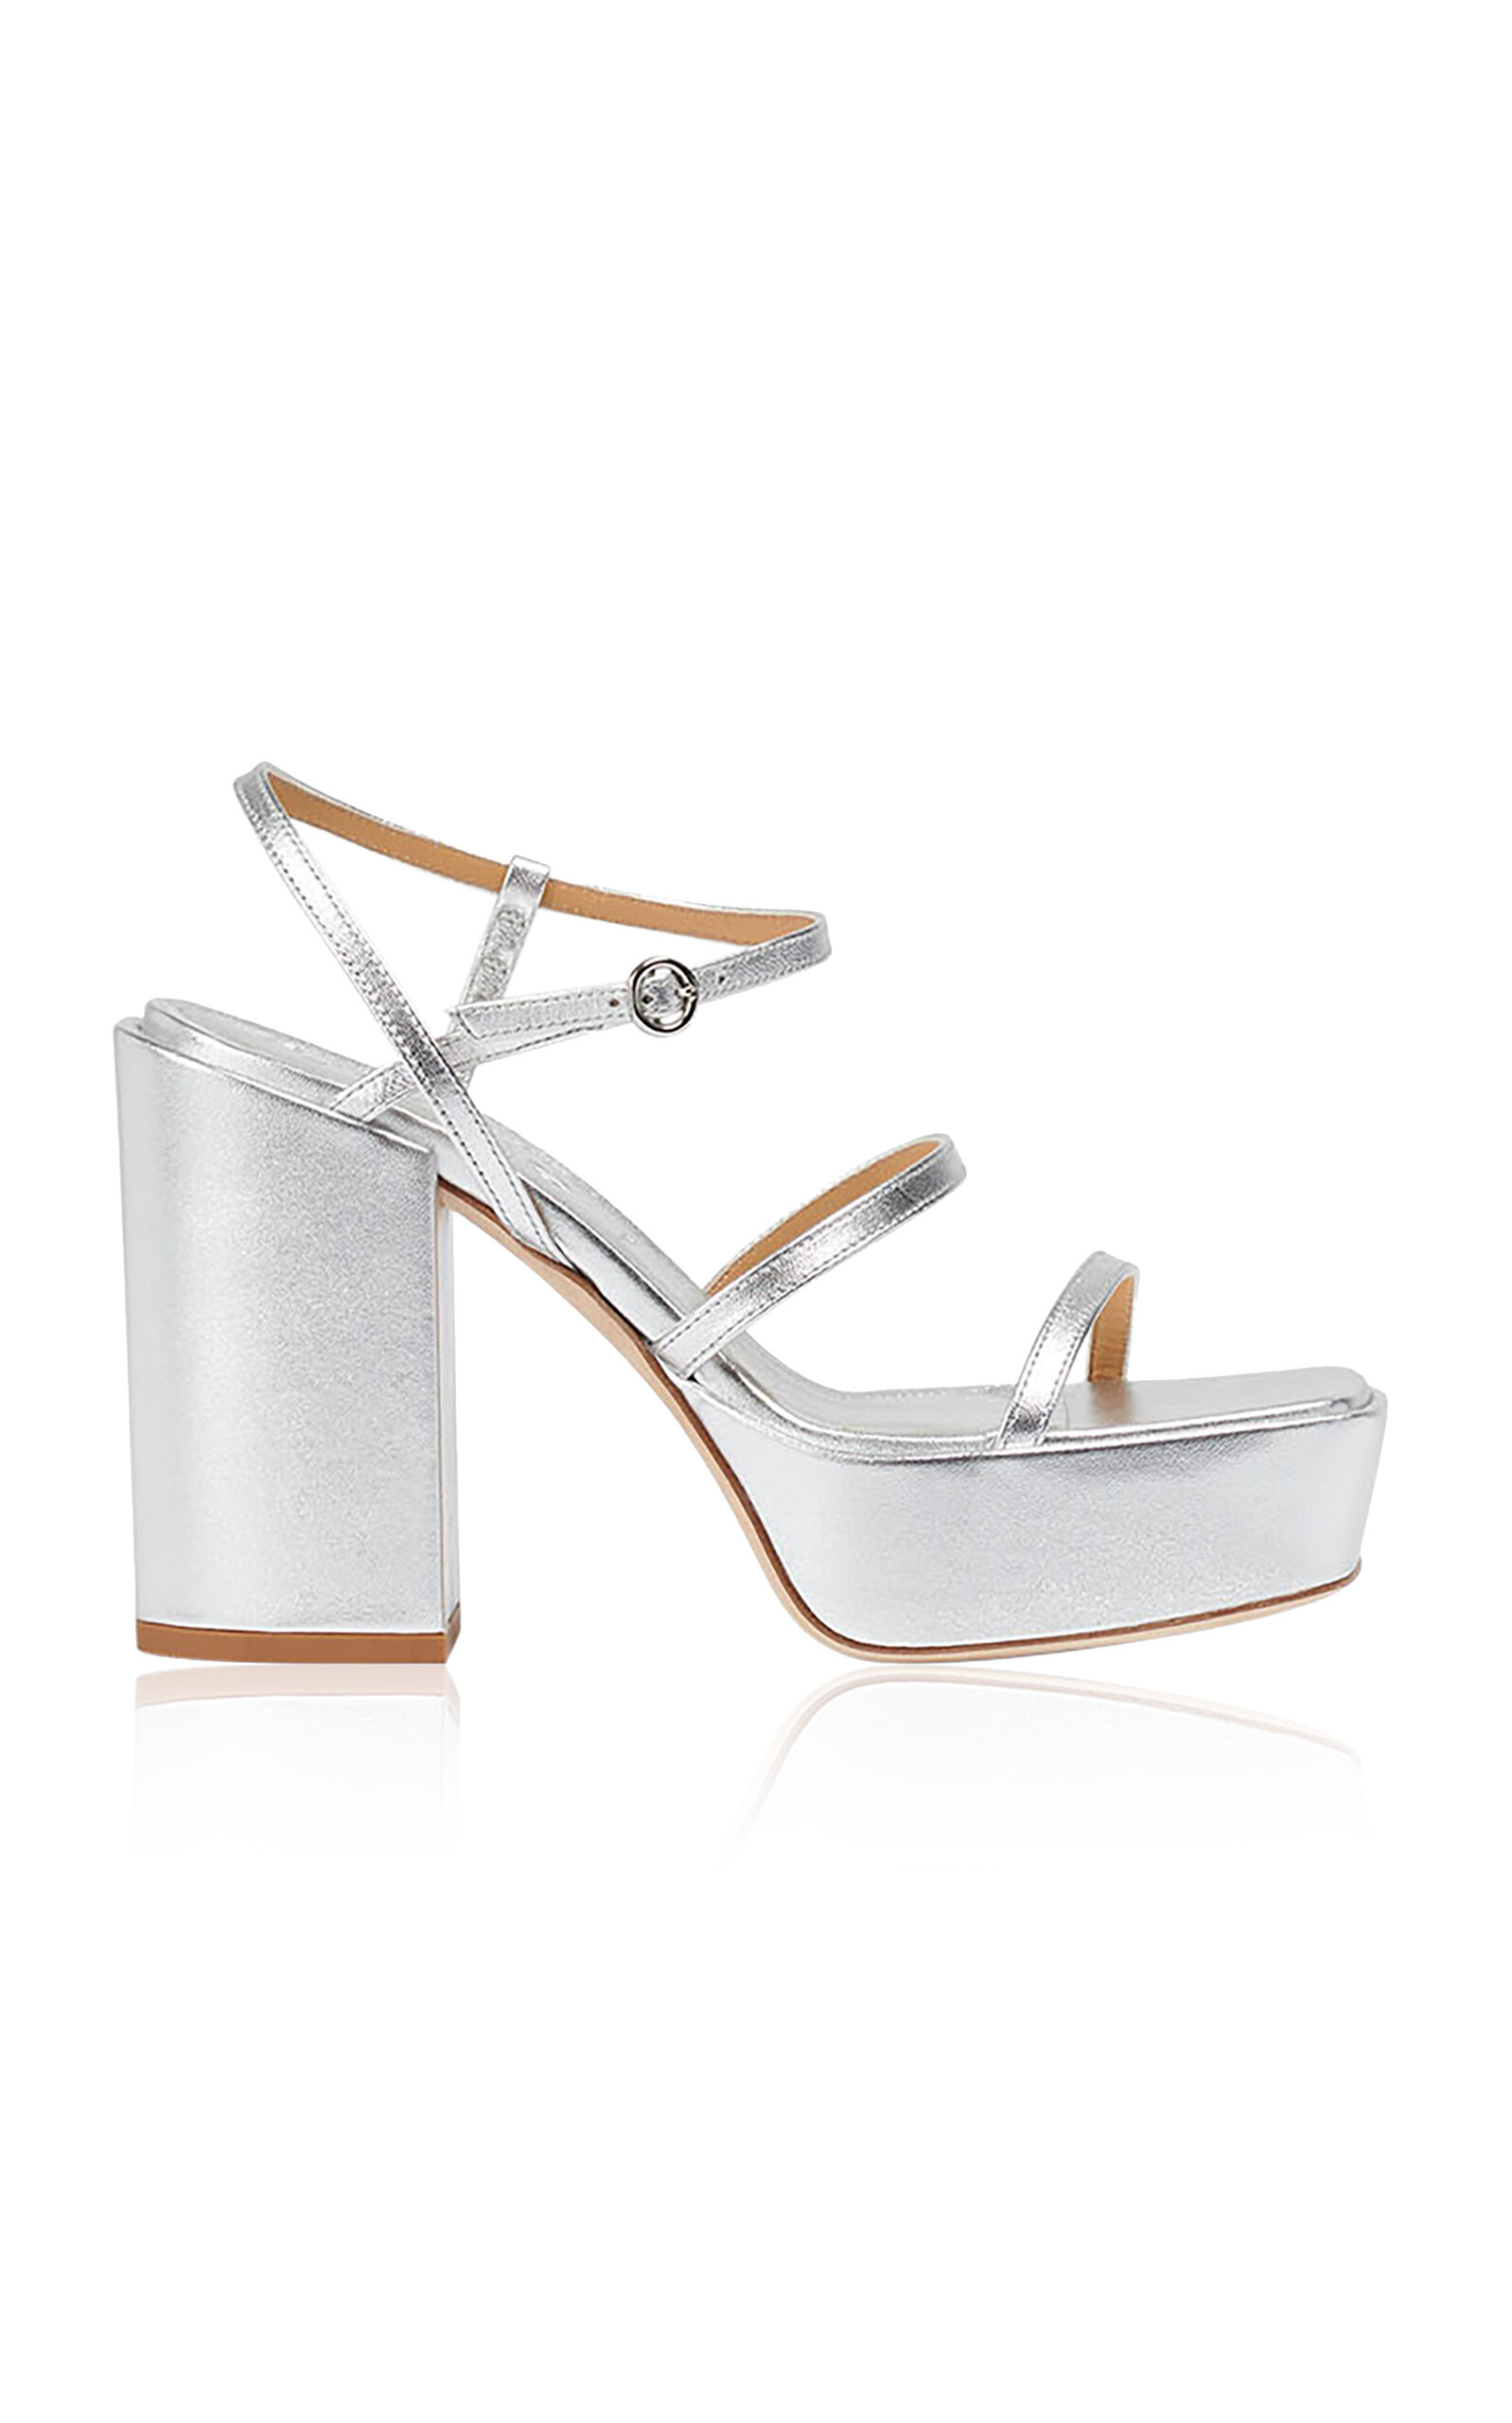 Aeyde Katalin Laminated Nappa Leather Block Heel Sandals In Silver